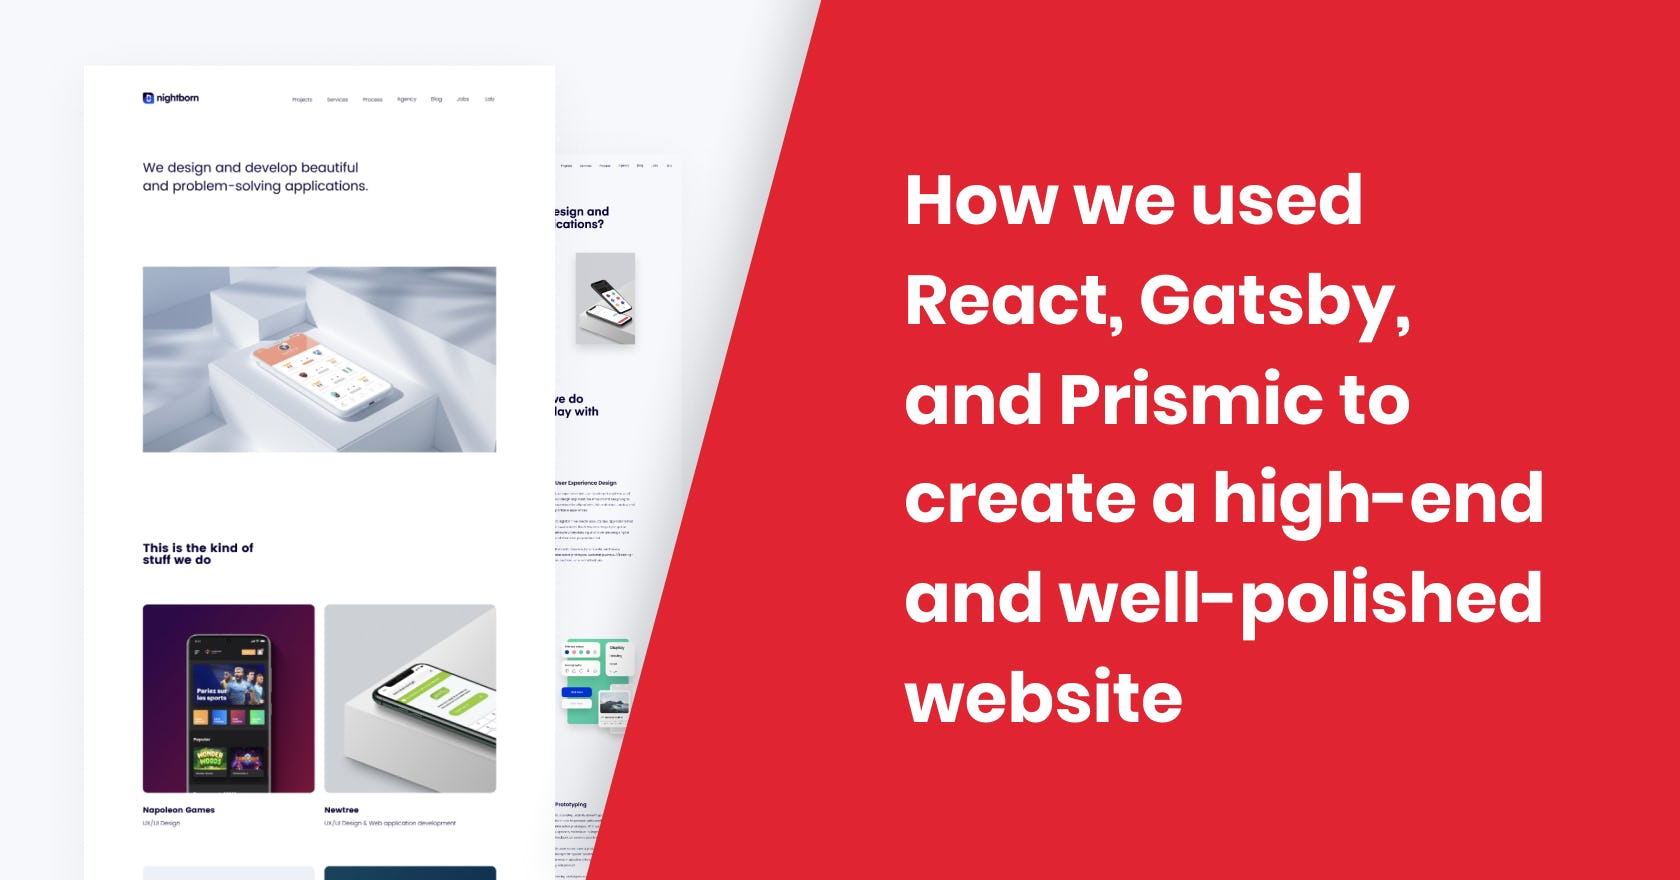 Nightborn - How we used React, Gatsby, and Prismic to create a high-end and well-polished website